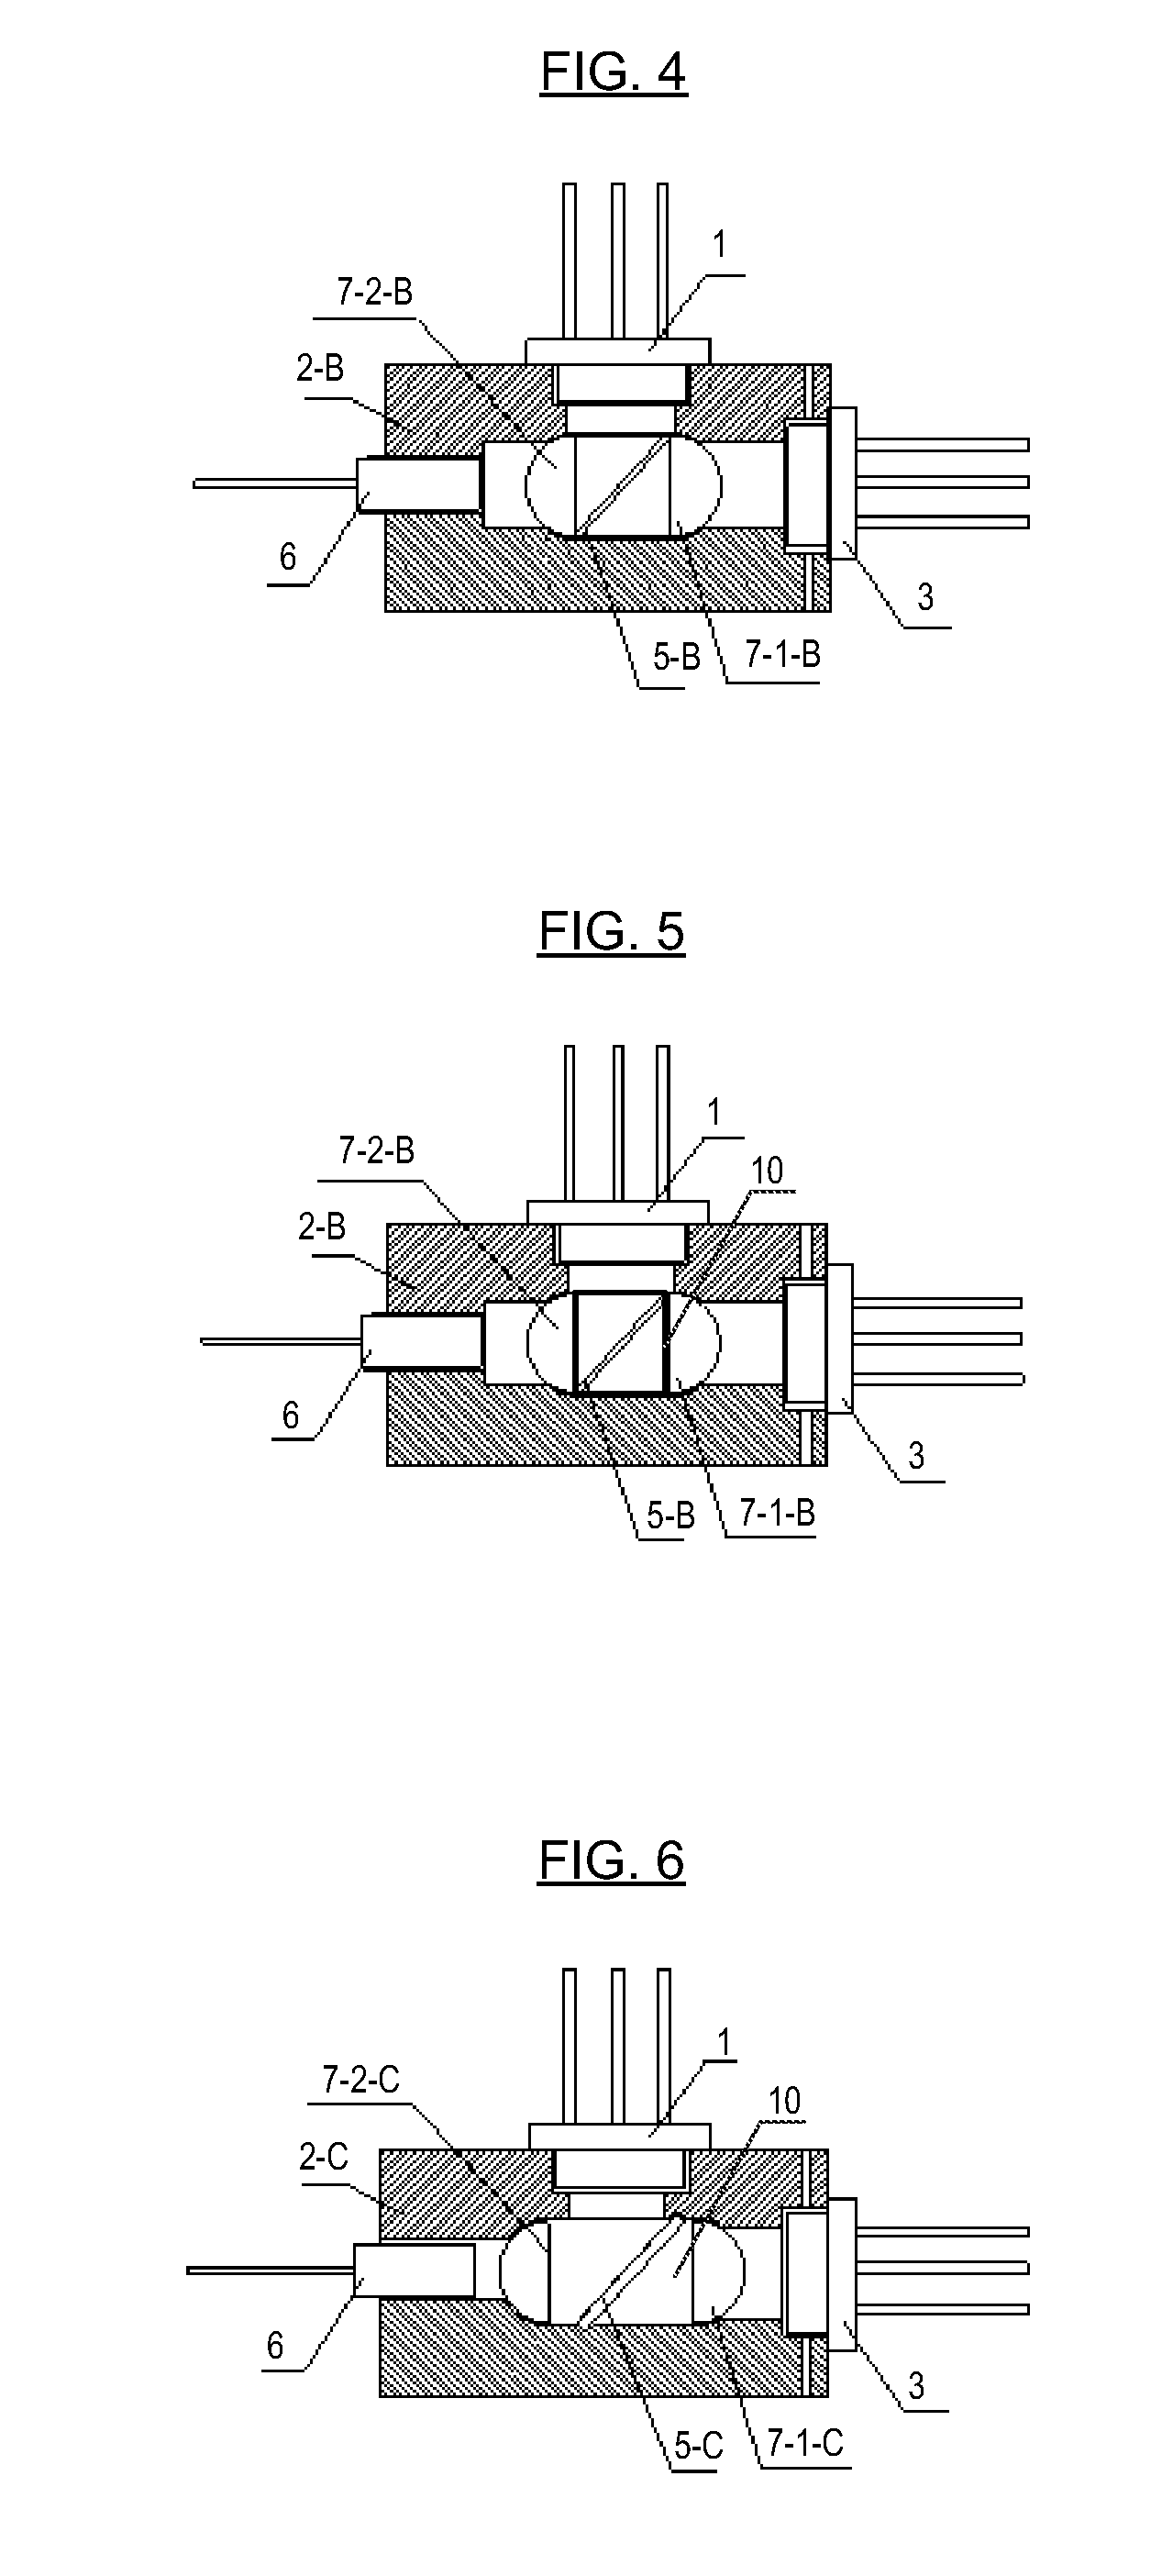 Bi-Directional Fiber Optic Transceivers, Housings Therefor, and Methods for Making and Using the Same